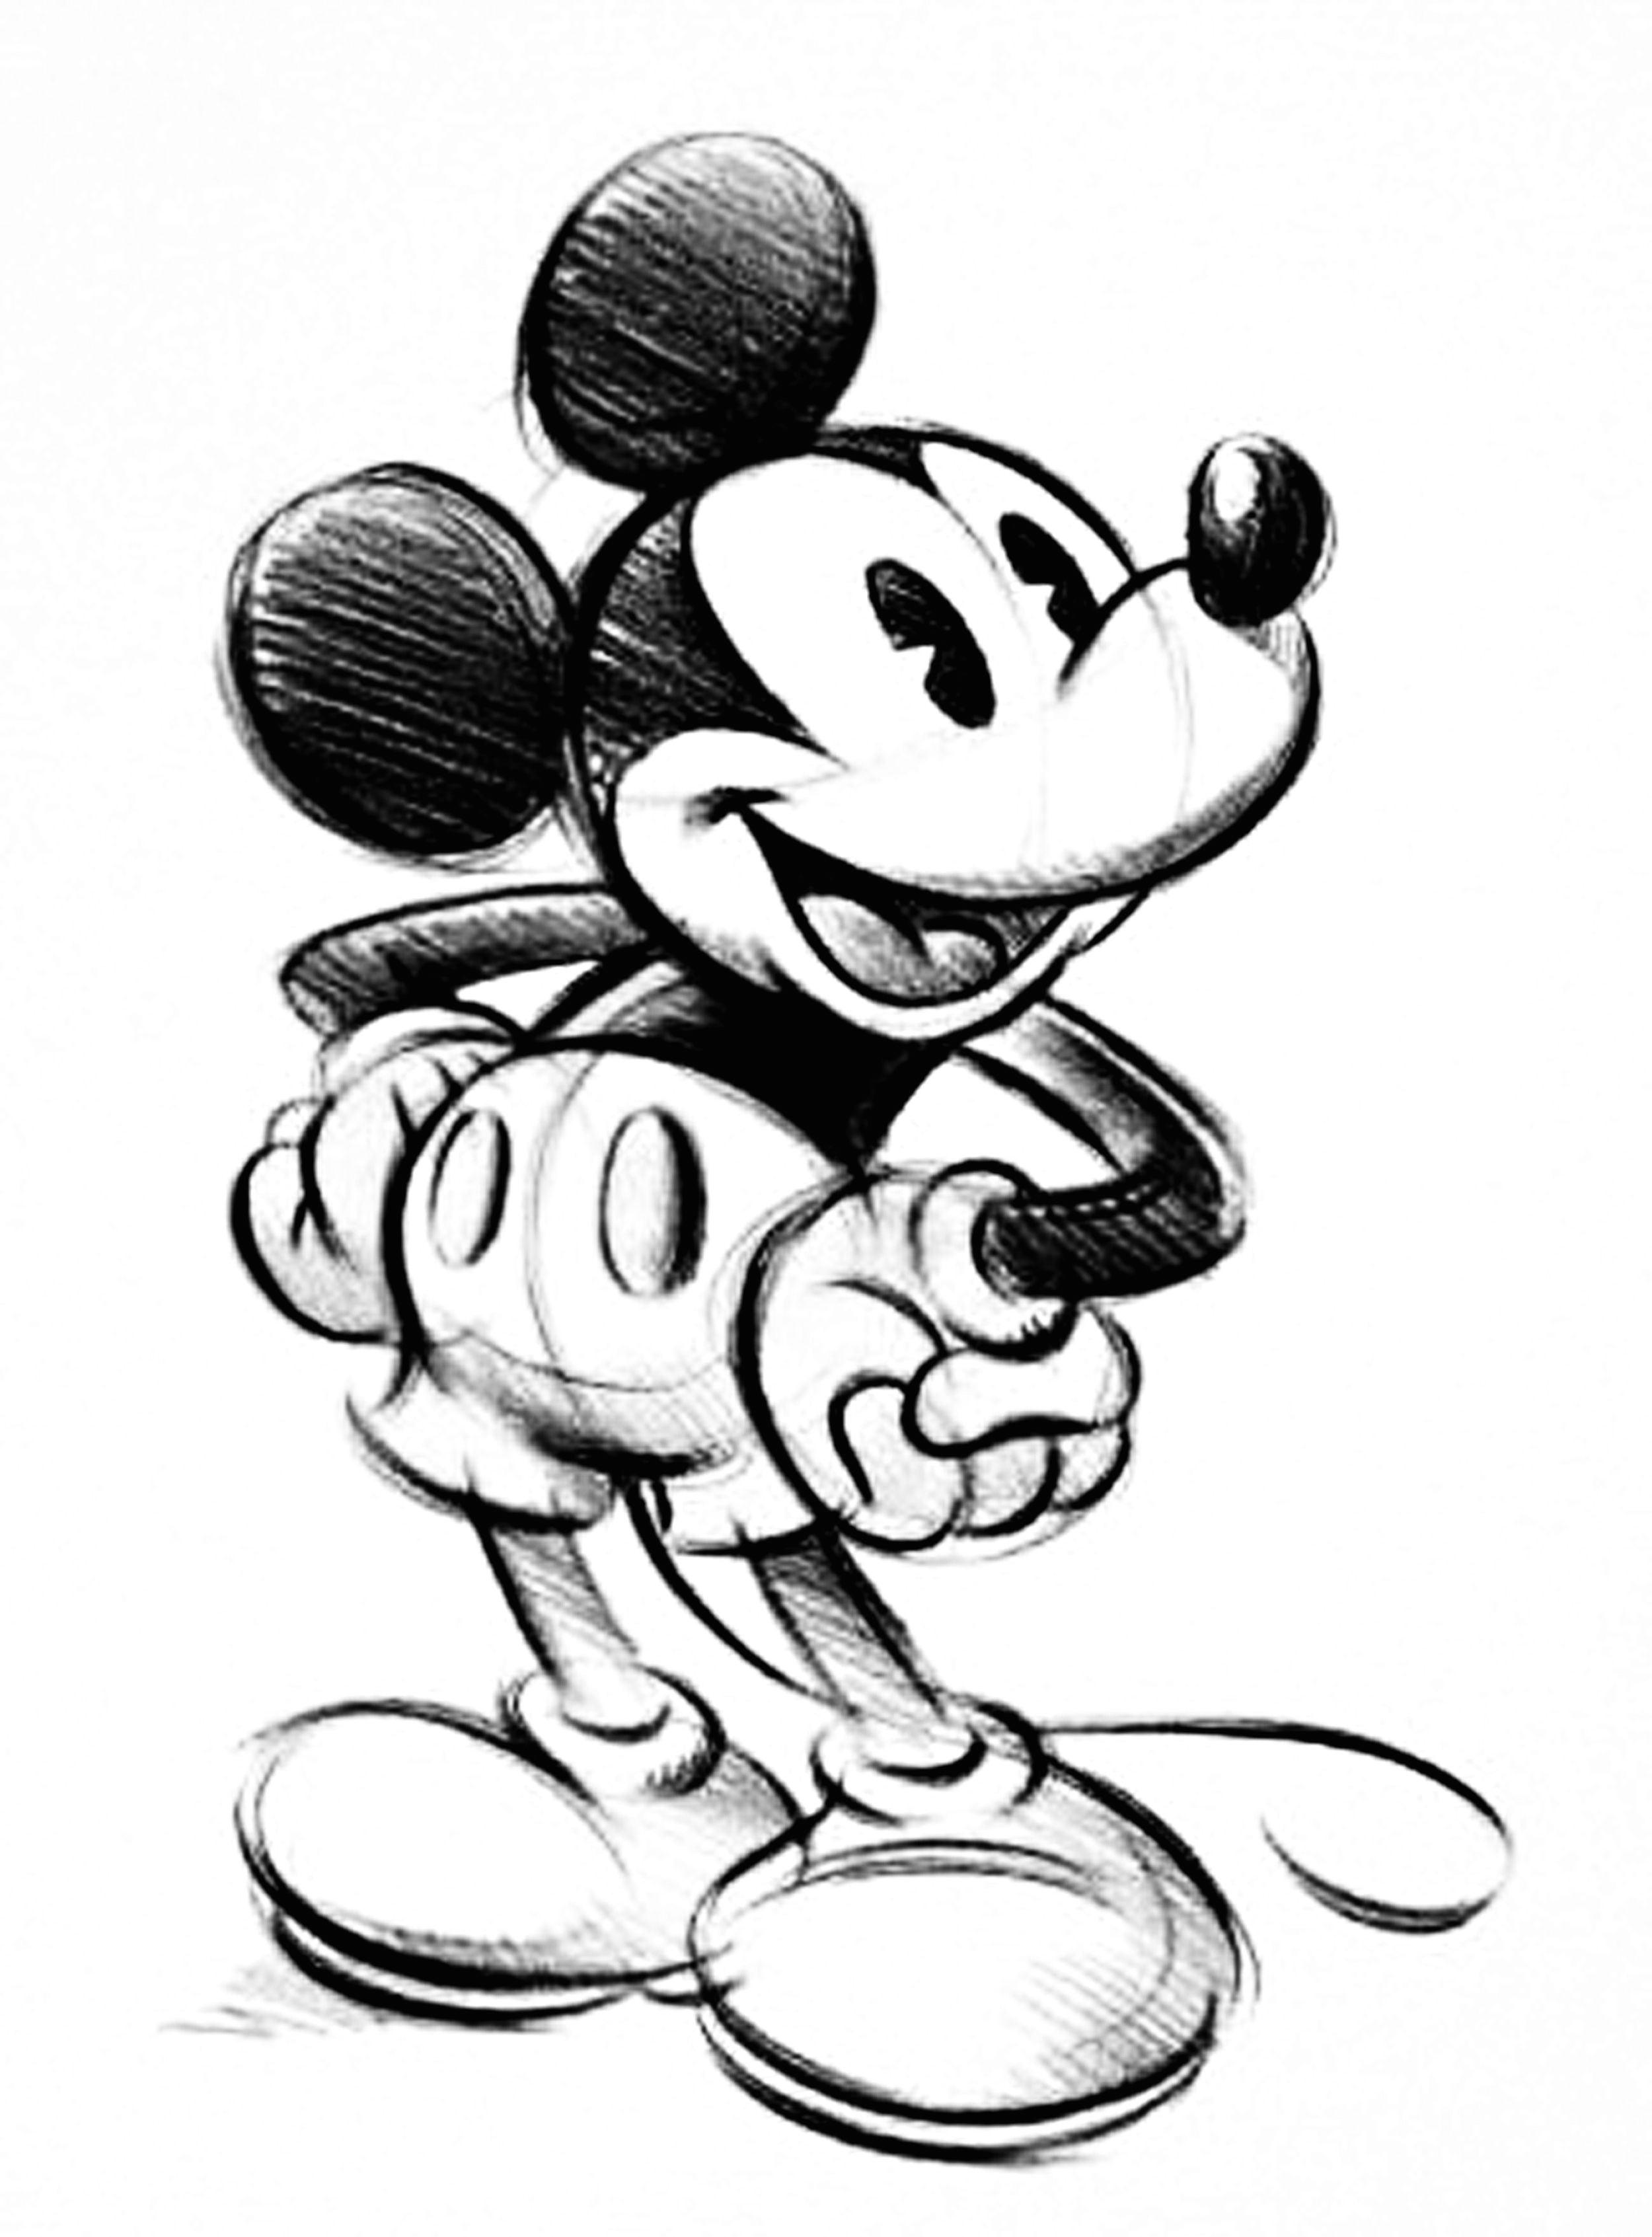 Drawing Cute Mice Mickey Mouse Sketch Drawings Art In 2019 Pinterest Mickey